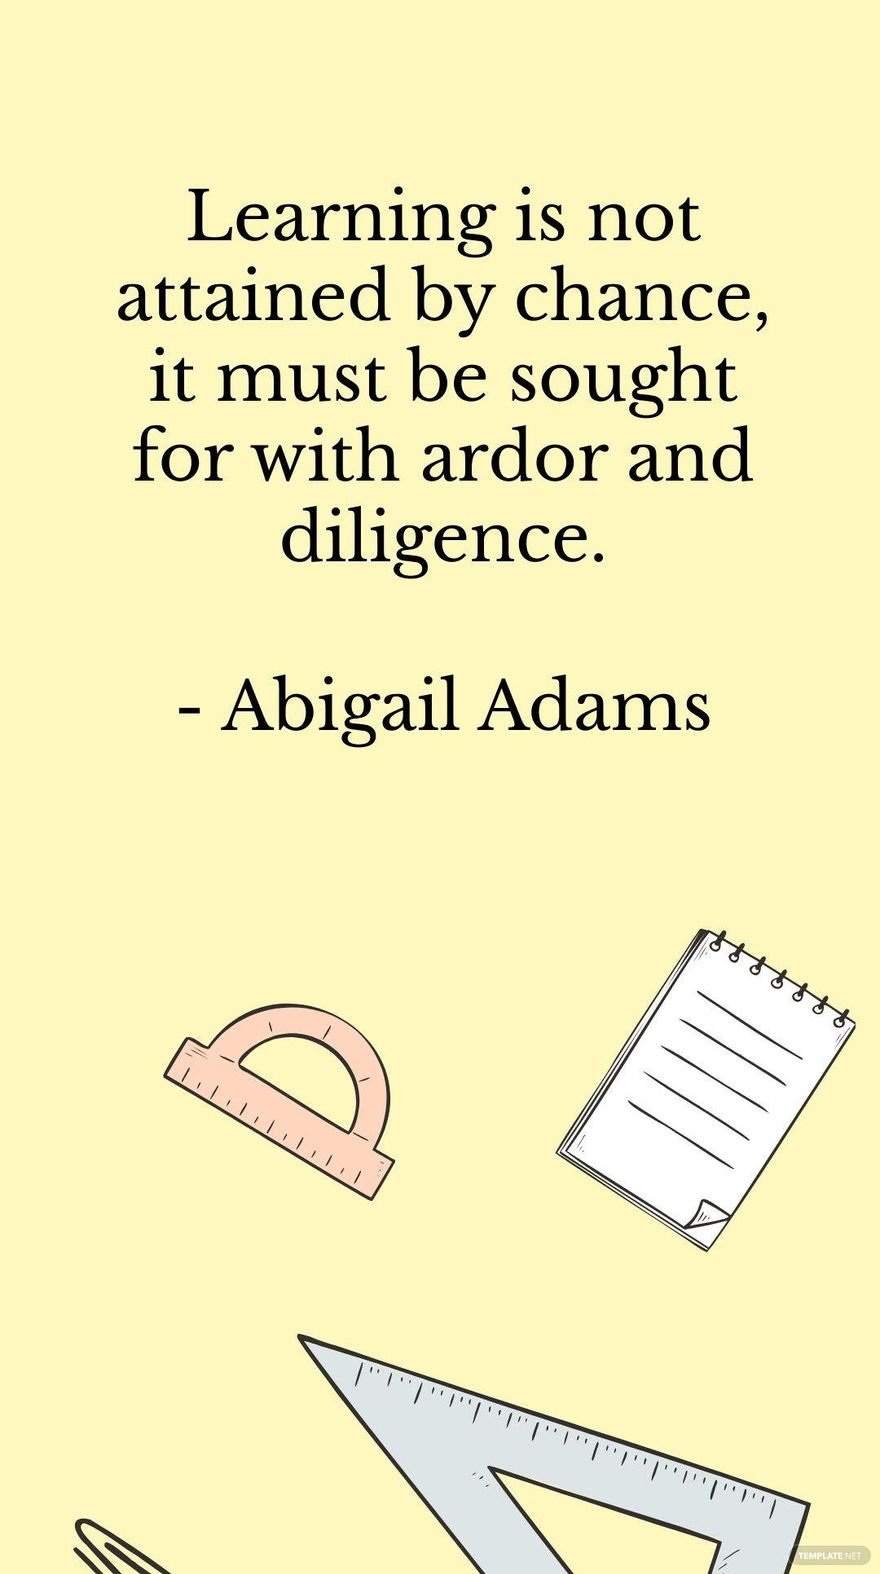 Abigail Adams - Learning is not attained by chance, it must be sought for with ardor and diligence. in JPG